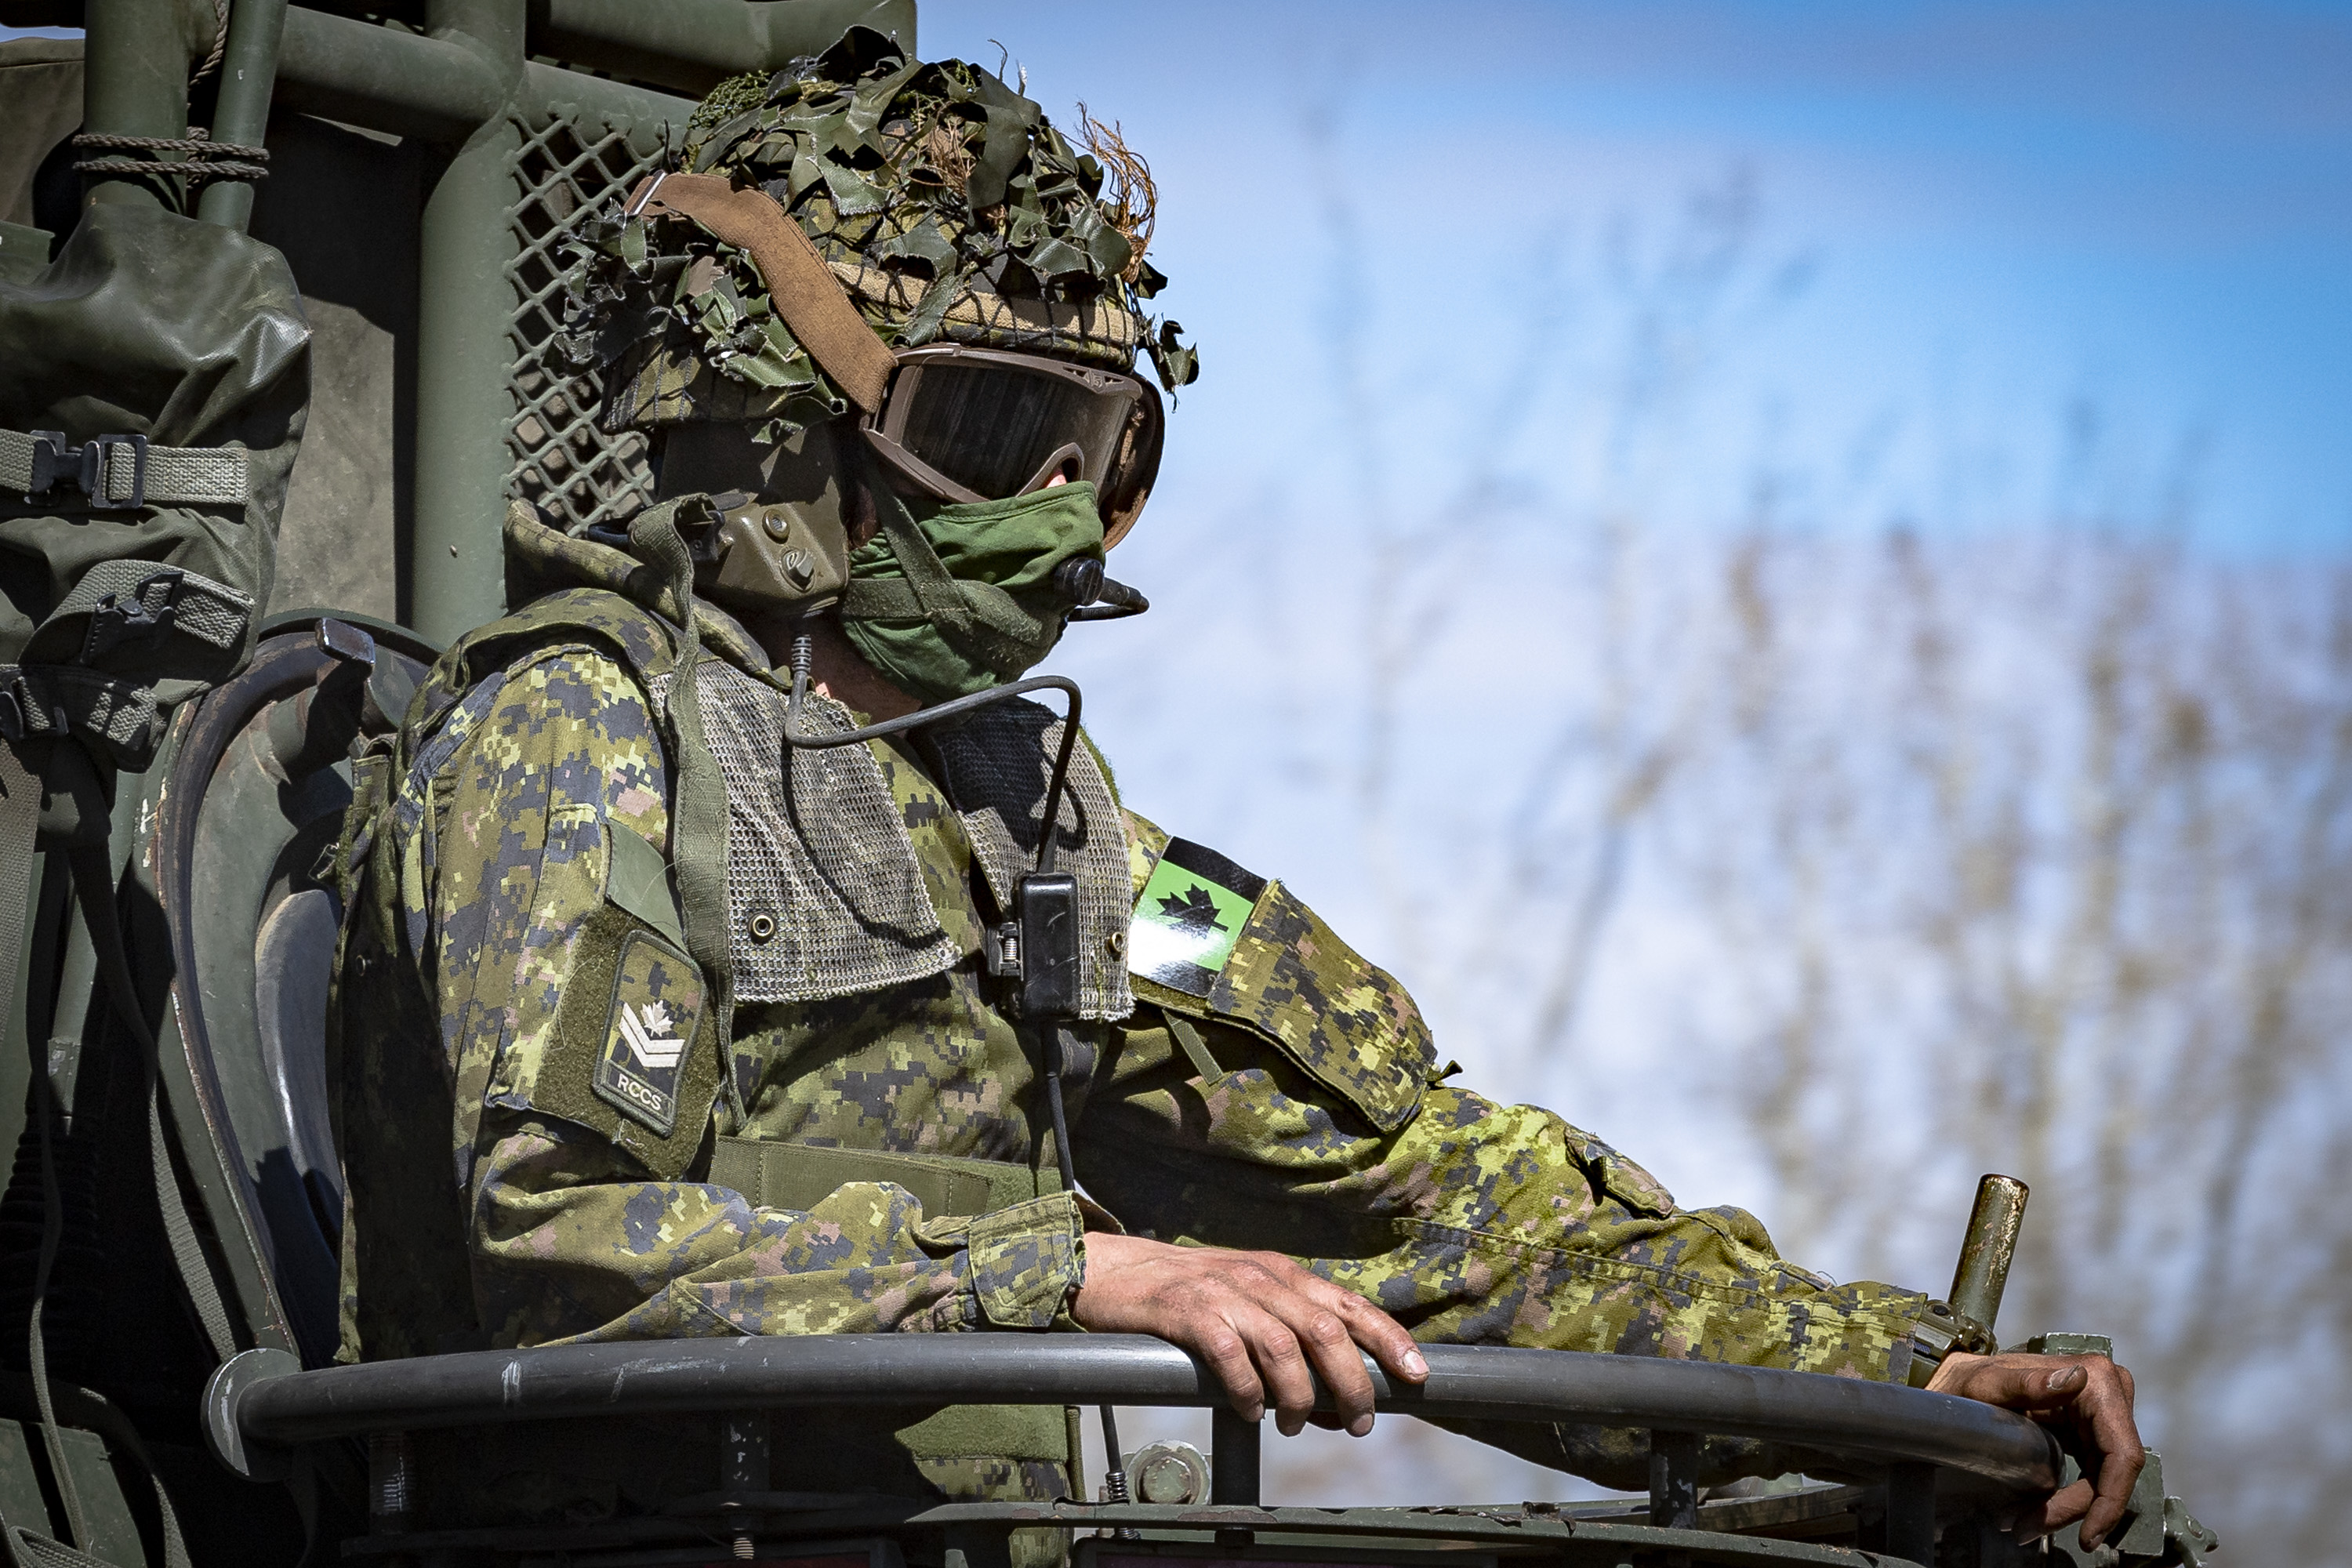 A Master Corporal from the Royal Canadian Corps of SignalsÂ rides on a Light Armoured Vehicle (LAV) III while in the training area at 3rd Canadian Division Support Base Garrison Wainwright in preparation for Exercise MAPLE RESOLVE 21 on April 30, 2021. 